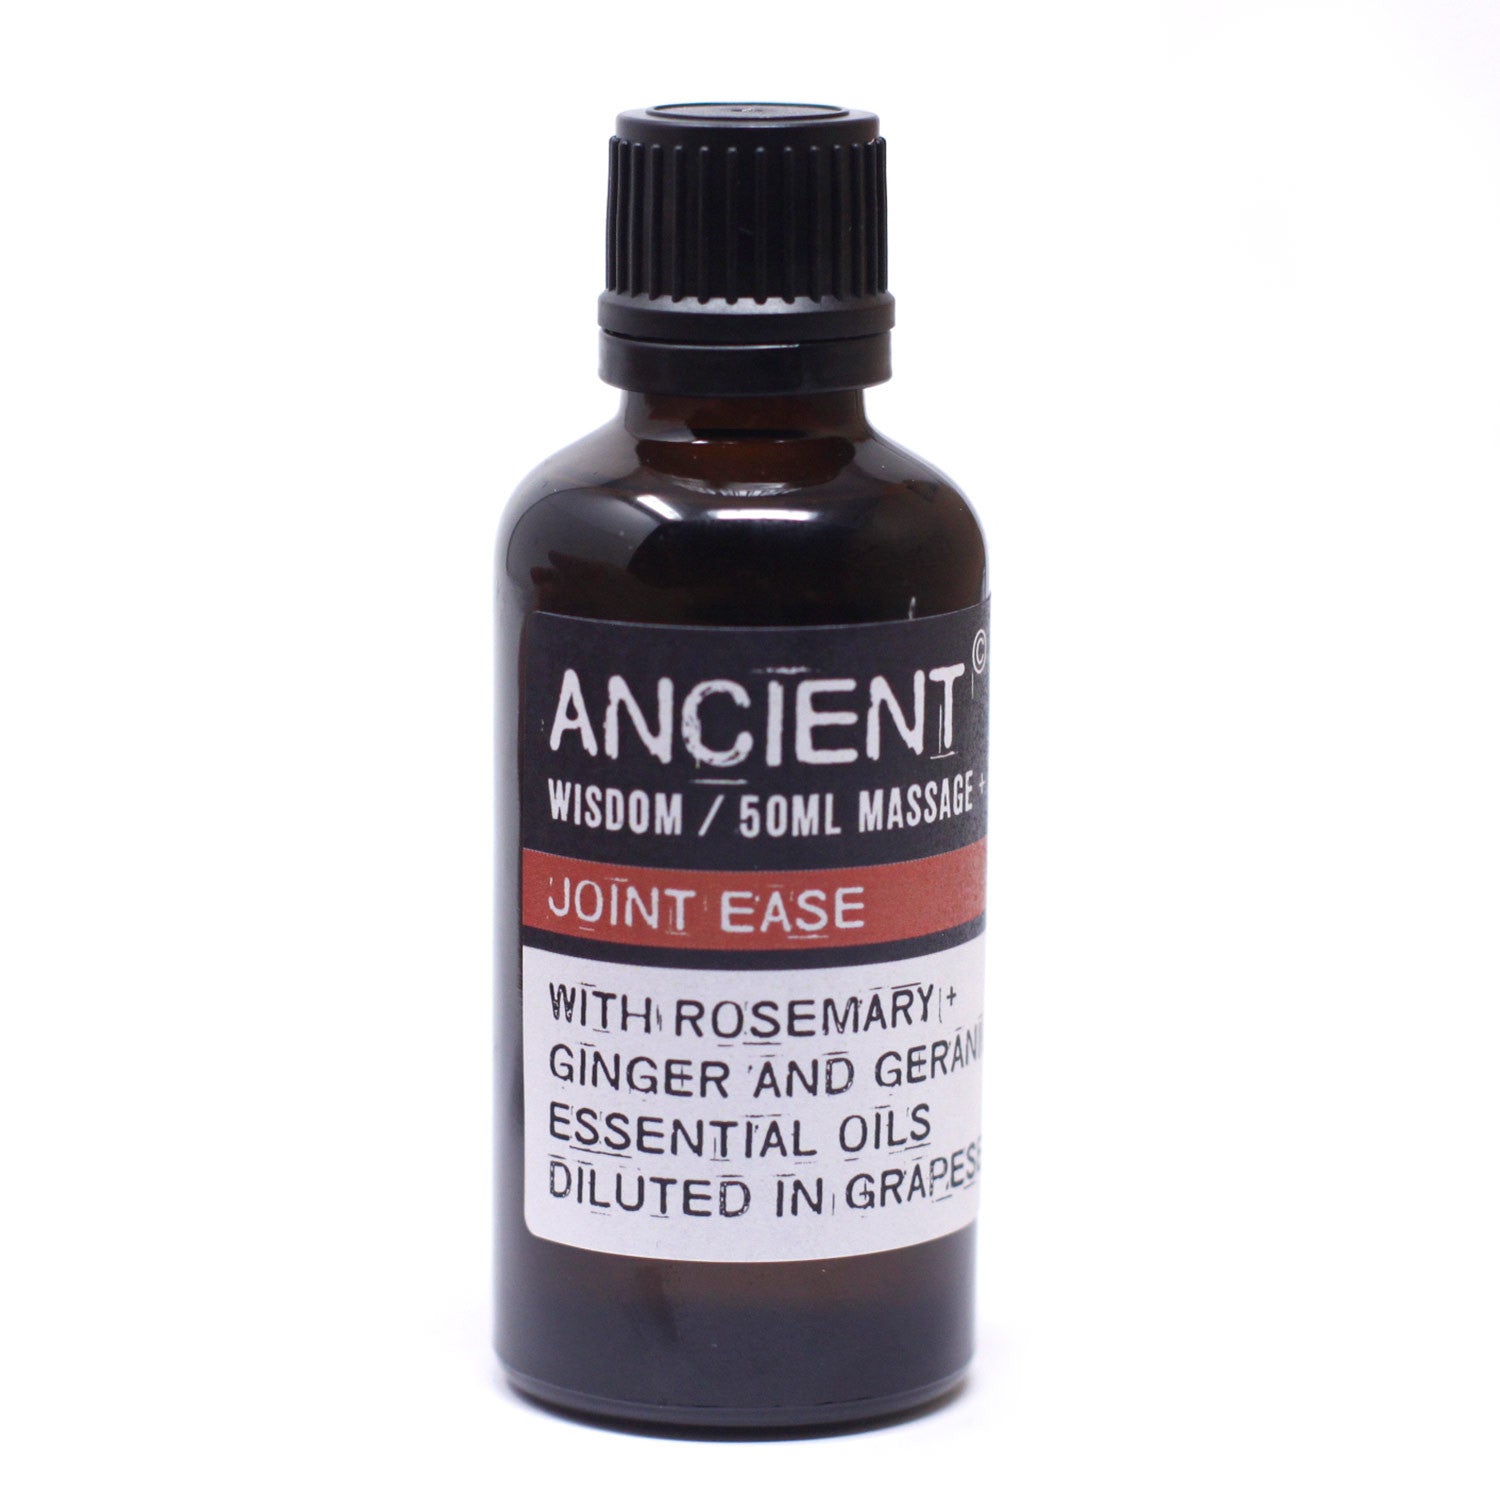 View Joints Ease Massage Oil 50ml information